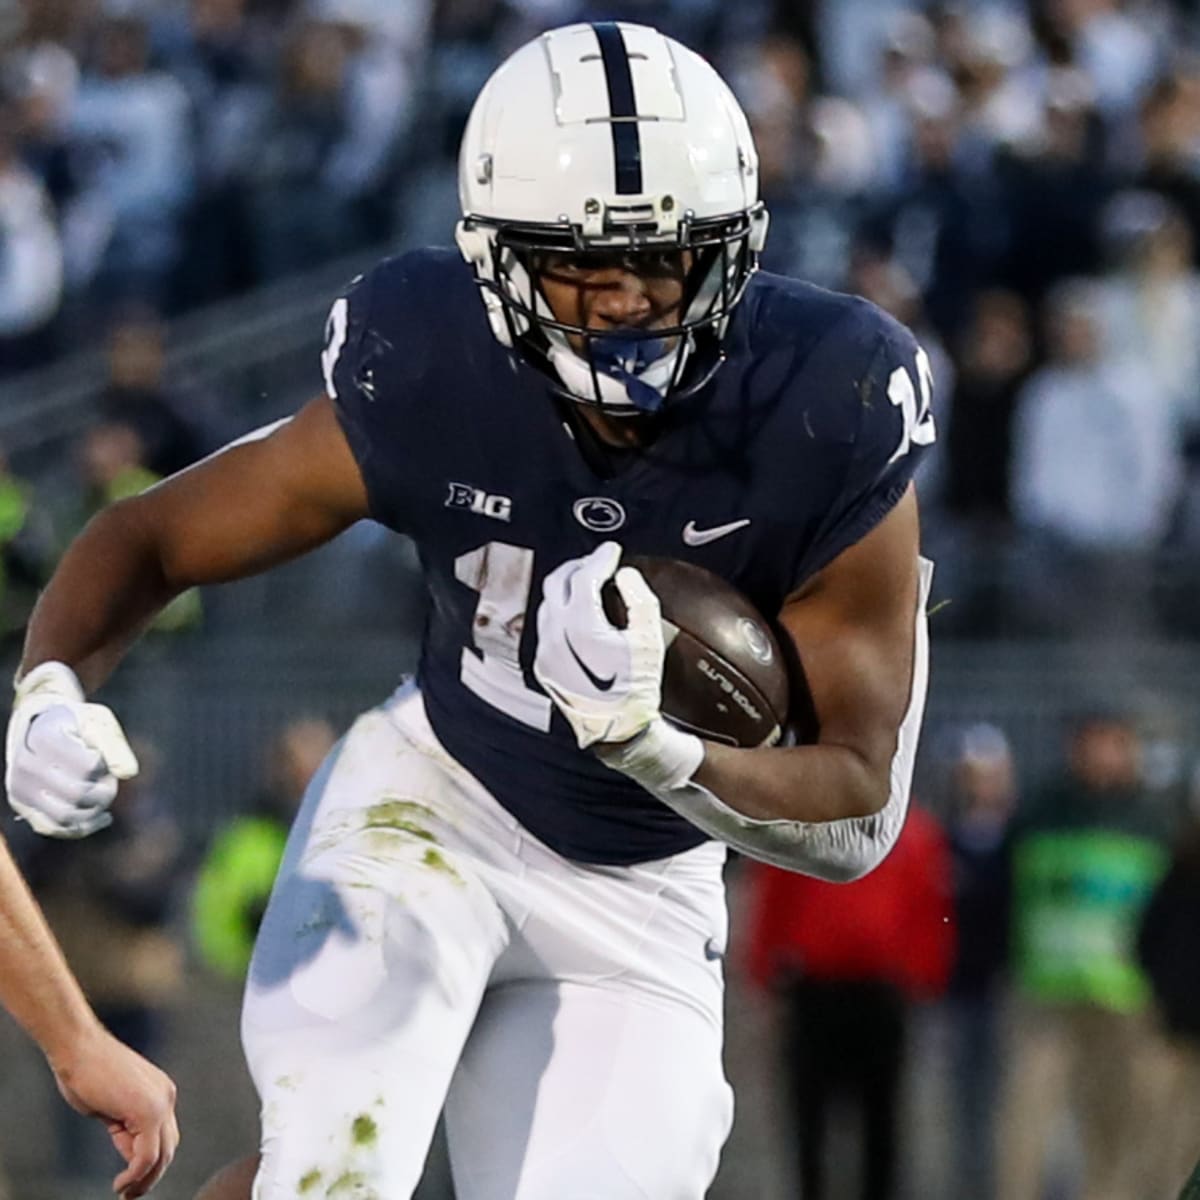 Penn State 2022 football schedule taking shape; new times released - On3